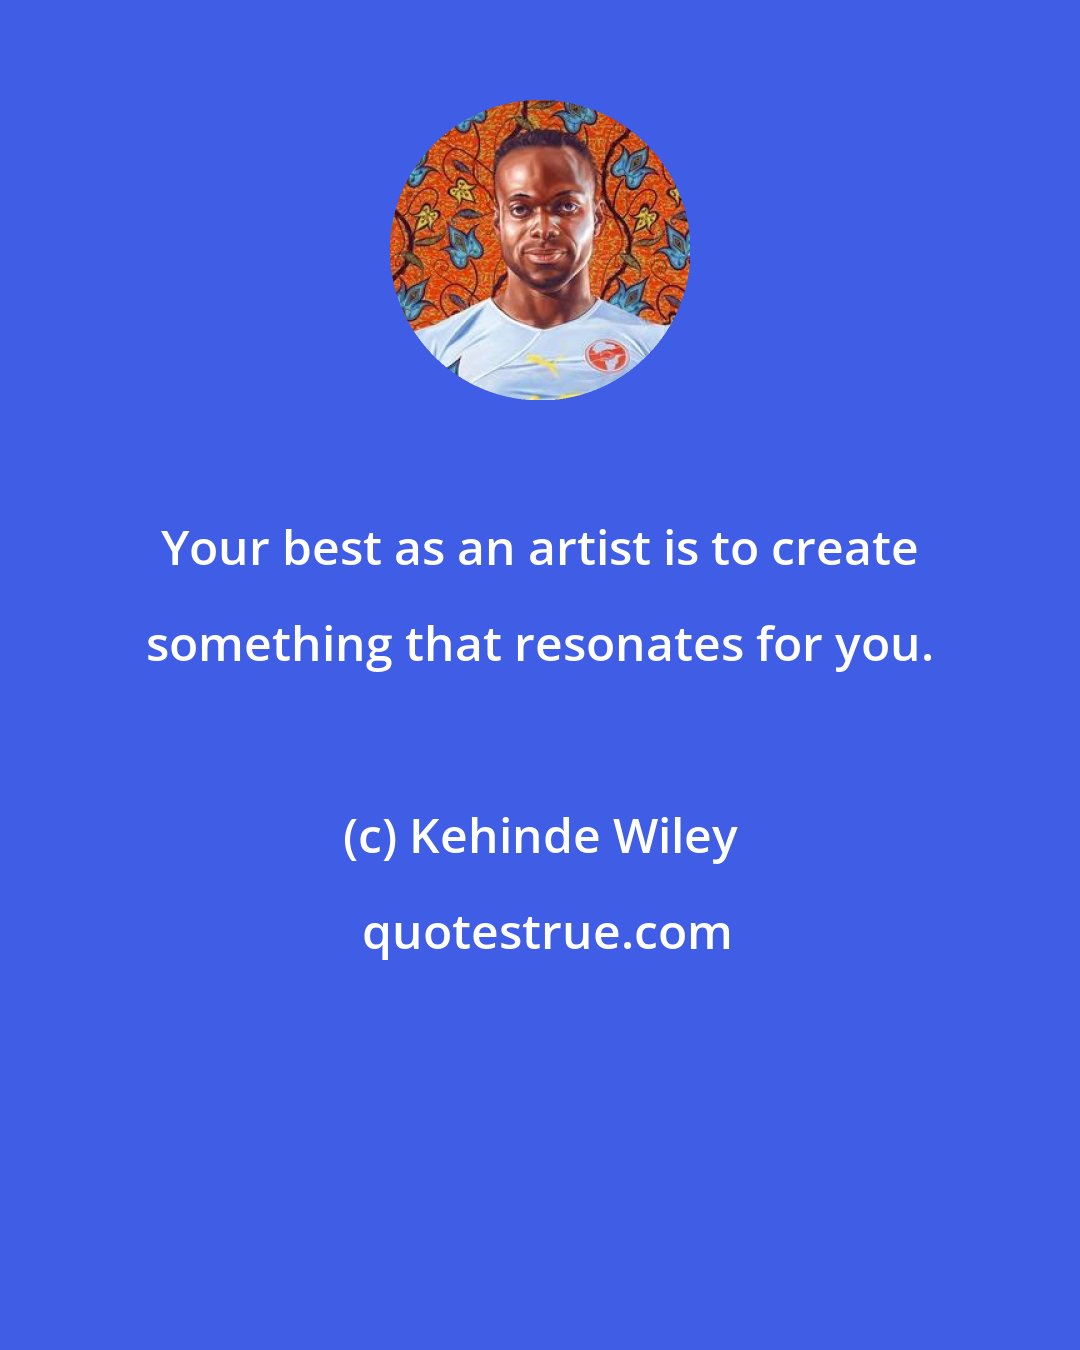 Kehinde Wiley: Your best as an artist is to create something that resonates for you.